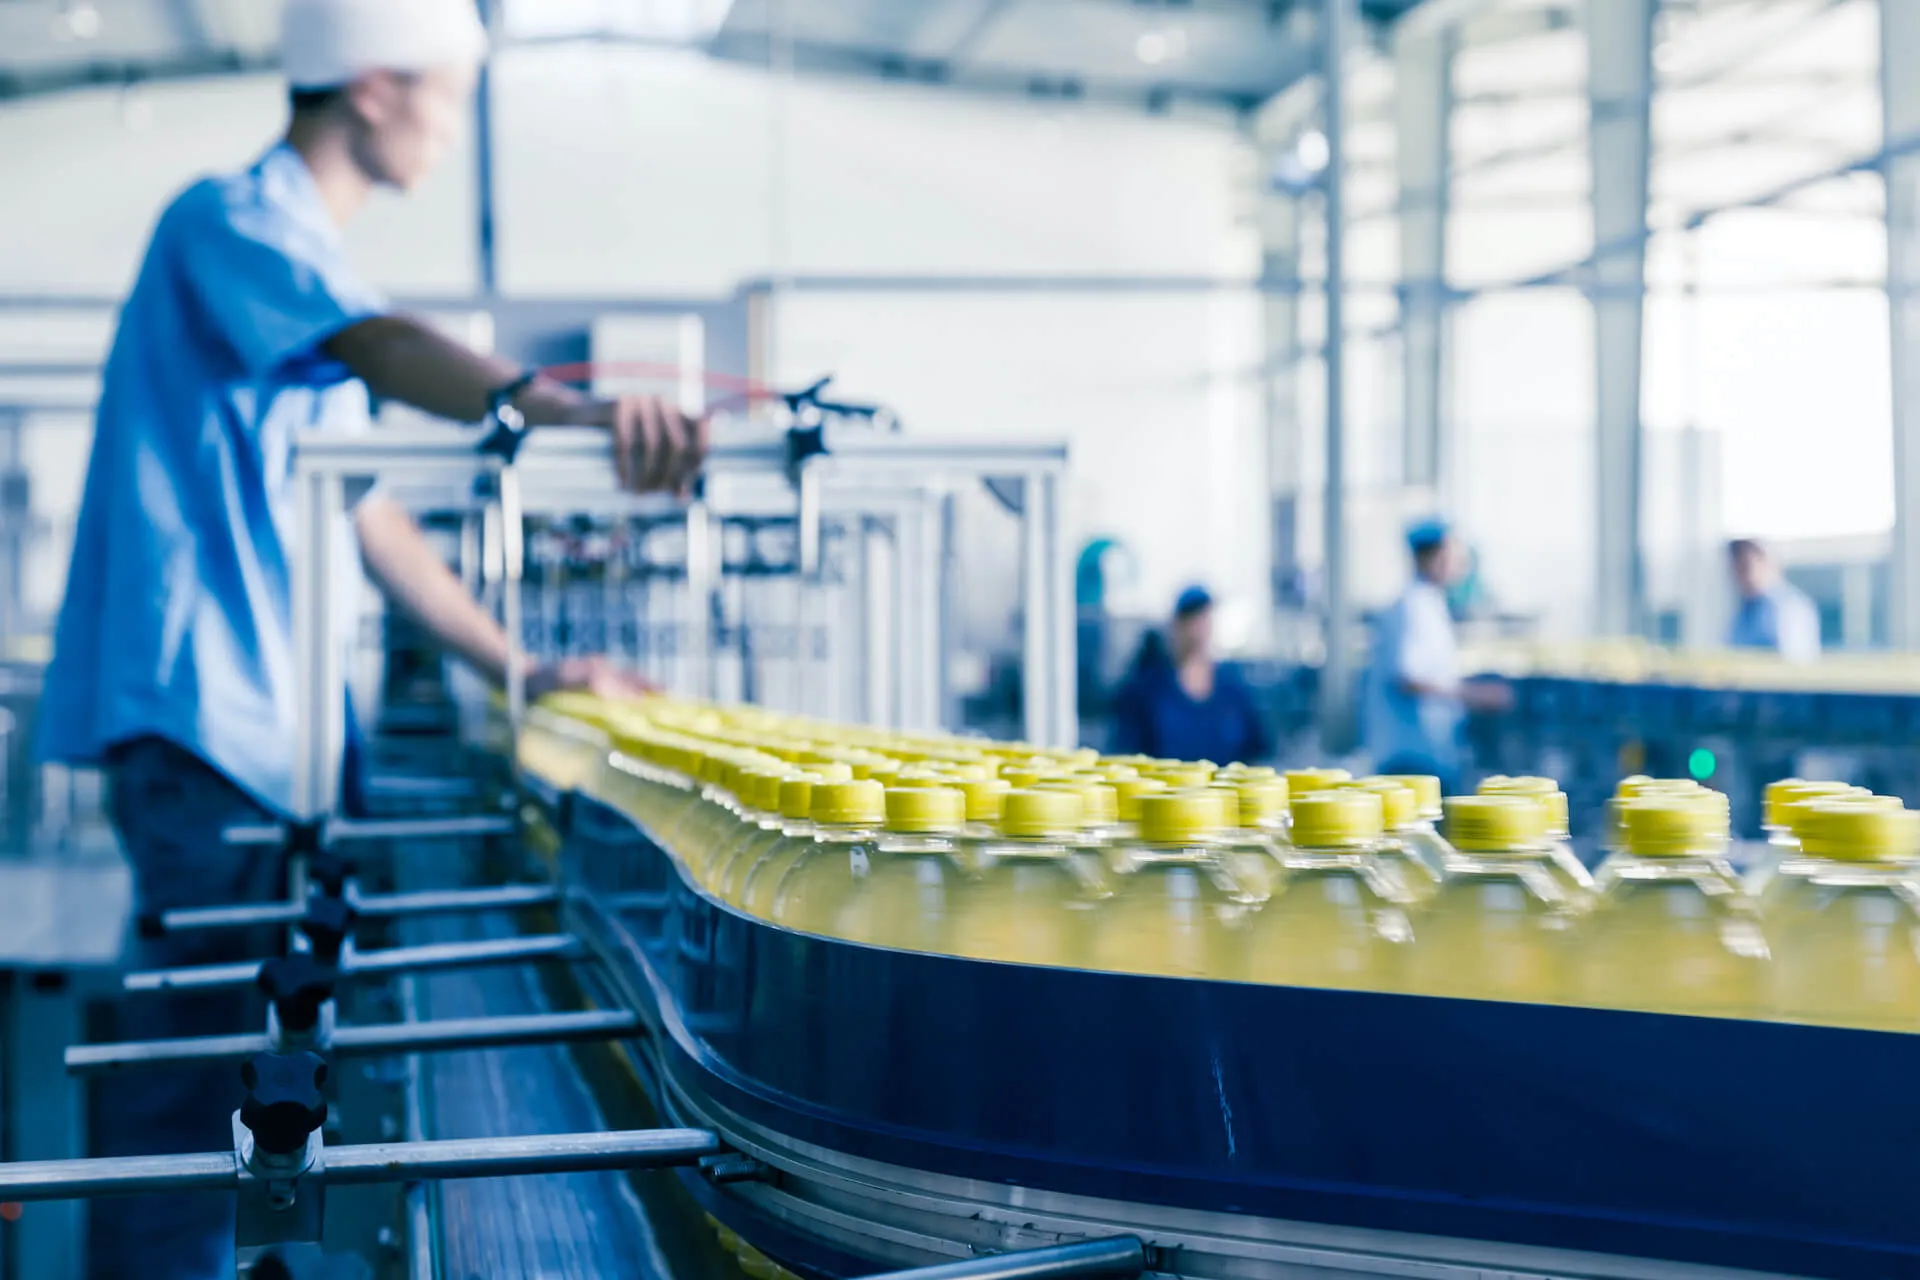 Conveyor of bottles on production line